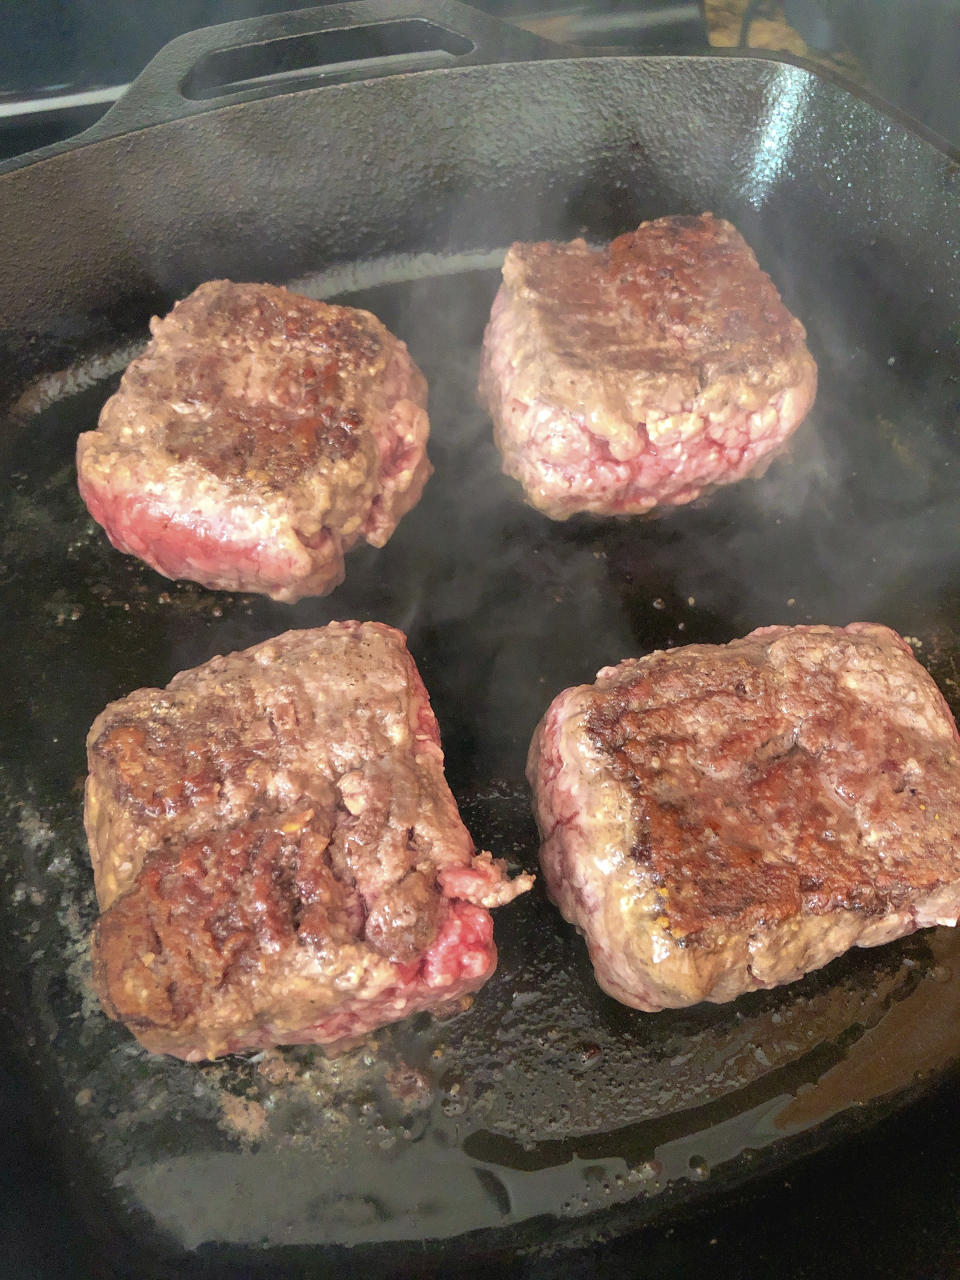 This June 2020 photo shows beef patties frying in a cast iron pan in Alexandria, Va. To get the best tasting burger, try making your own blend with better quality cuts of beef. (Elizabeth Karmel via AP)